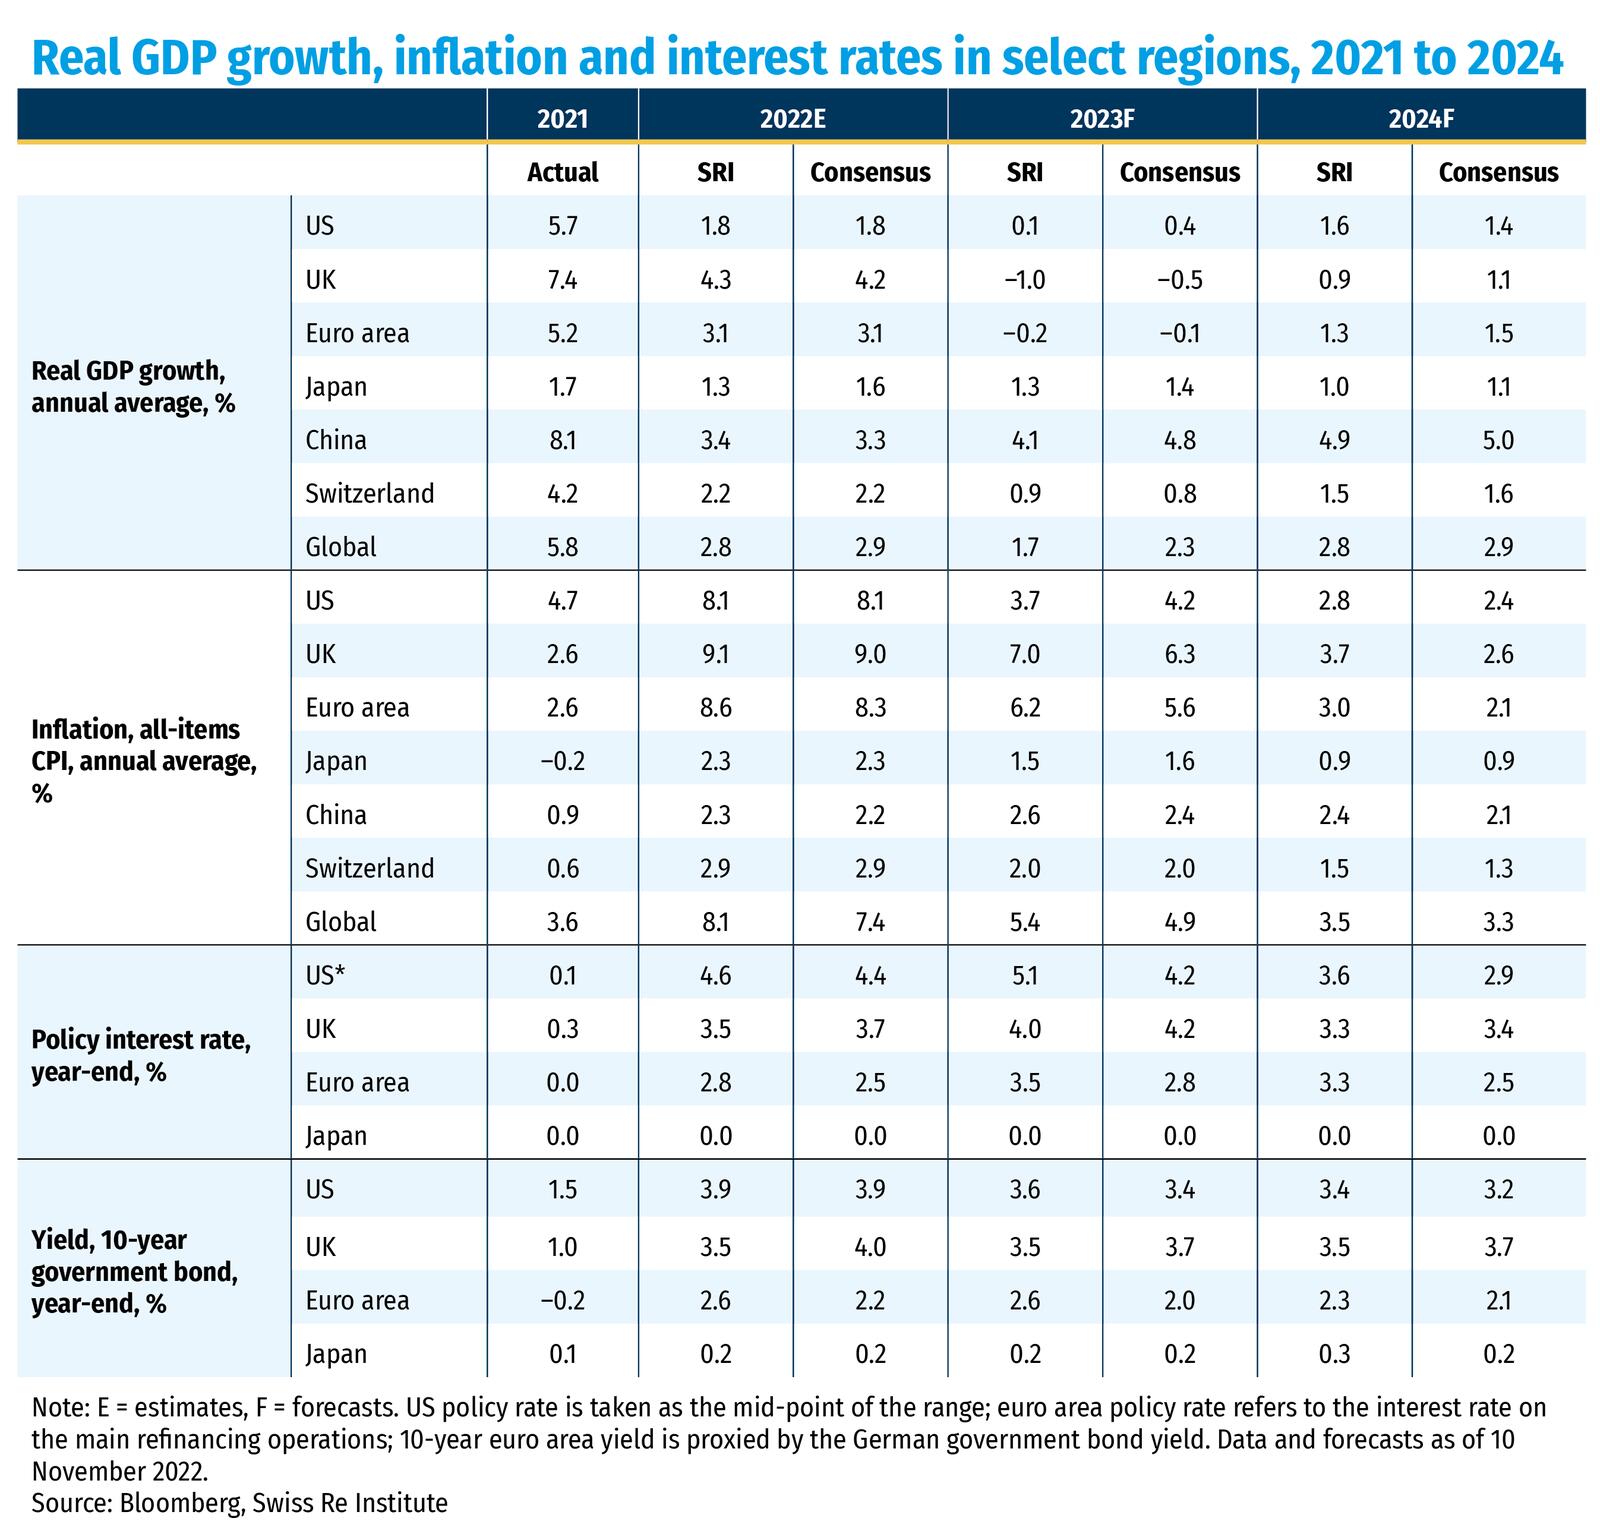 Real GDP growth, inflation and interest rates in select regions, 2021 to 2024